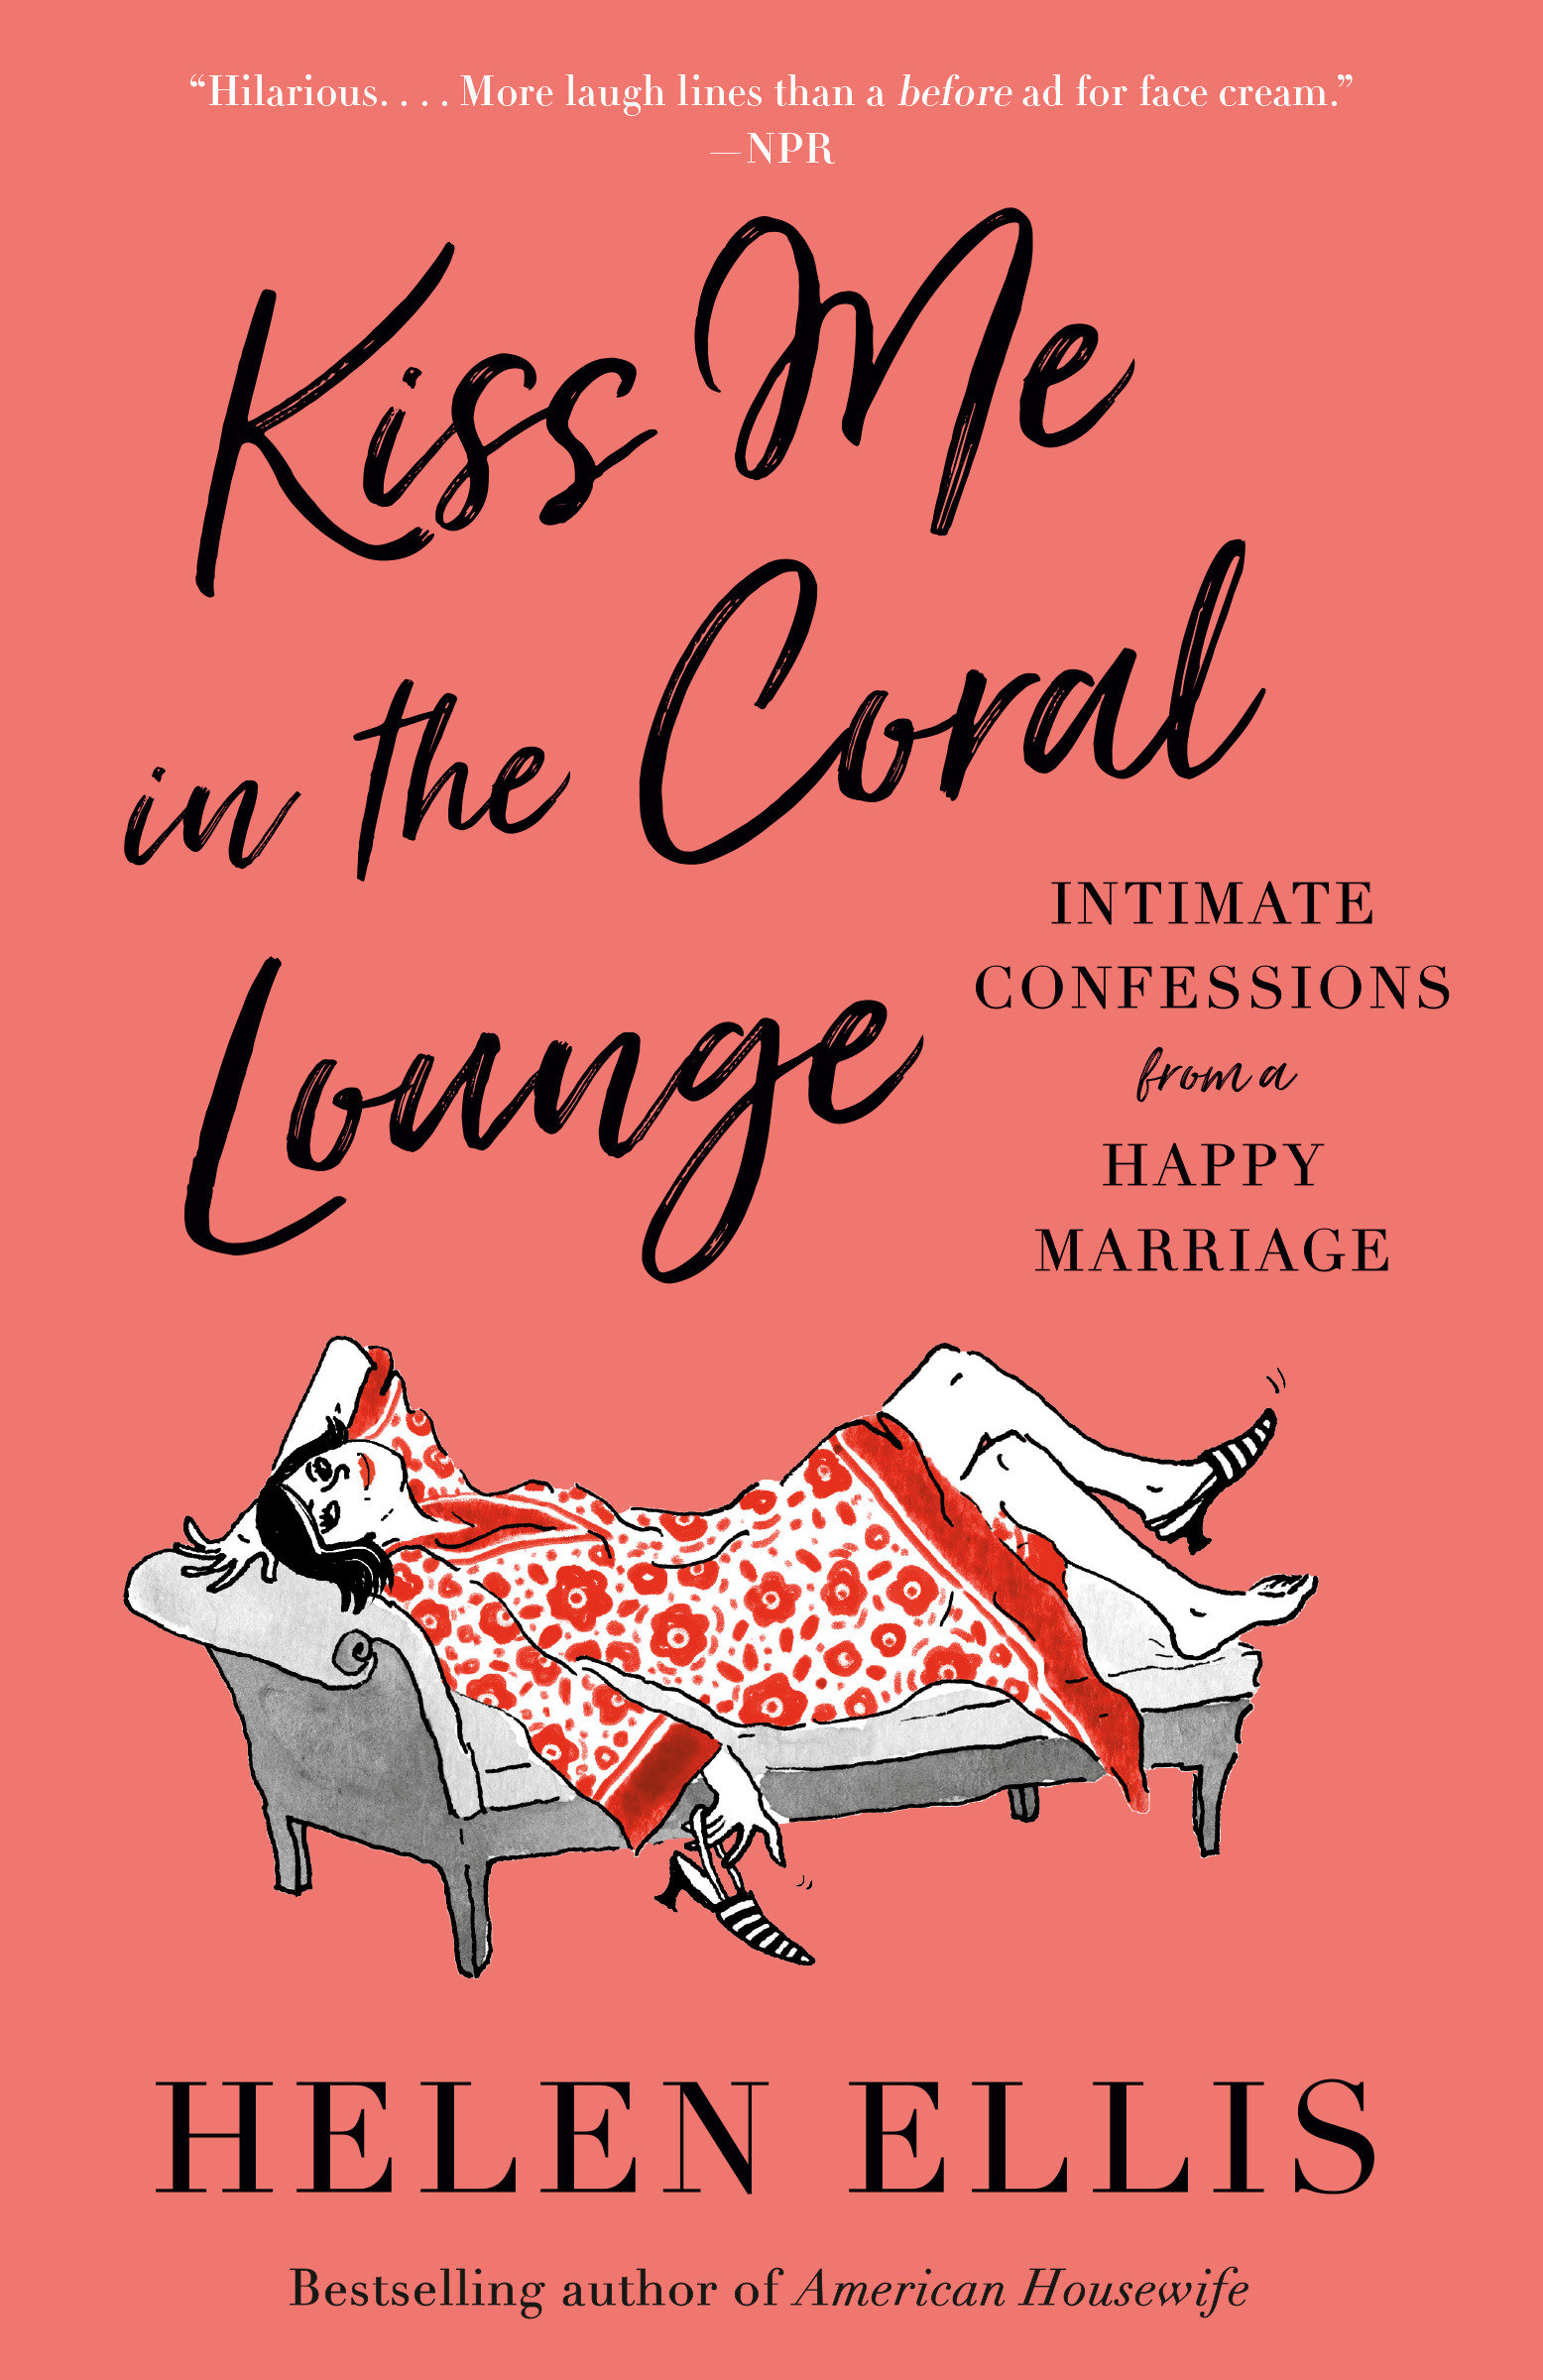 Kiss Me in the Coral Lounge Intimate Confessions from a Happy Marriage cover image